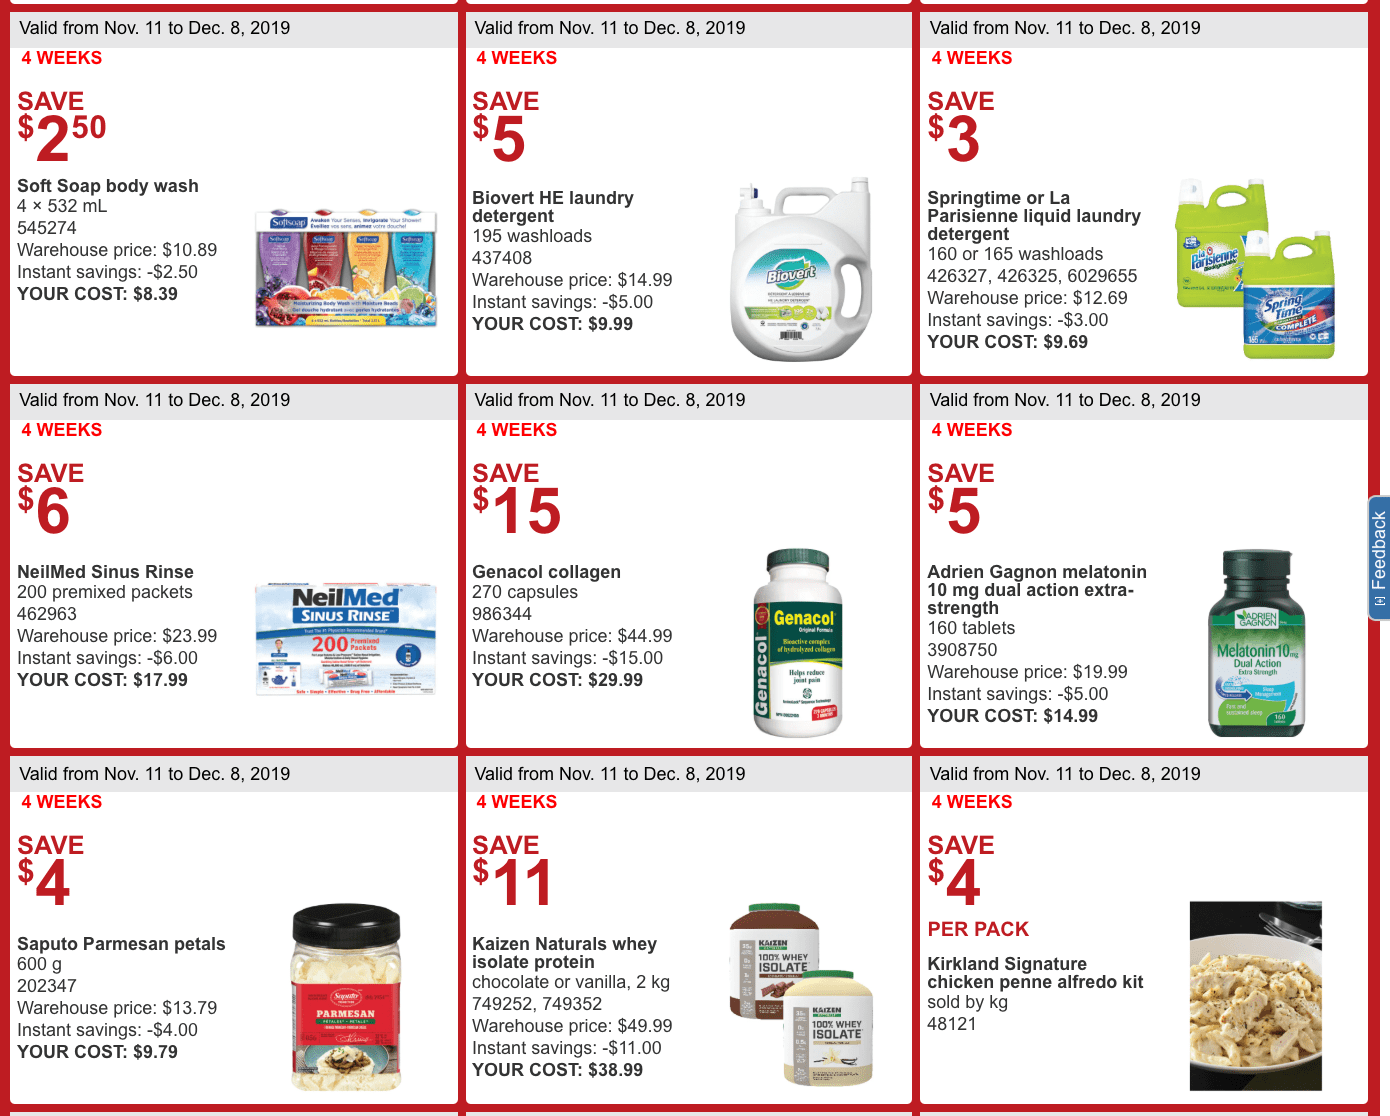 Costco Canada More Savings Weekly Coupons/Flyers for: Quebec, November 25 – December 1